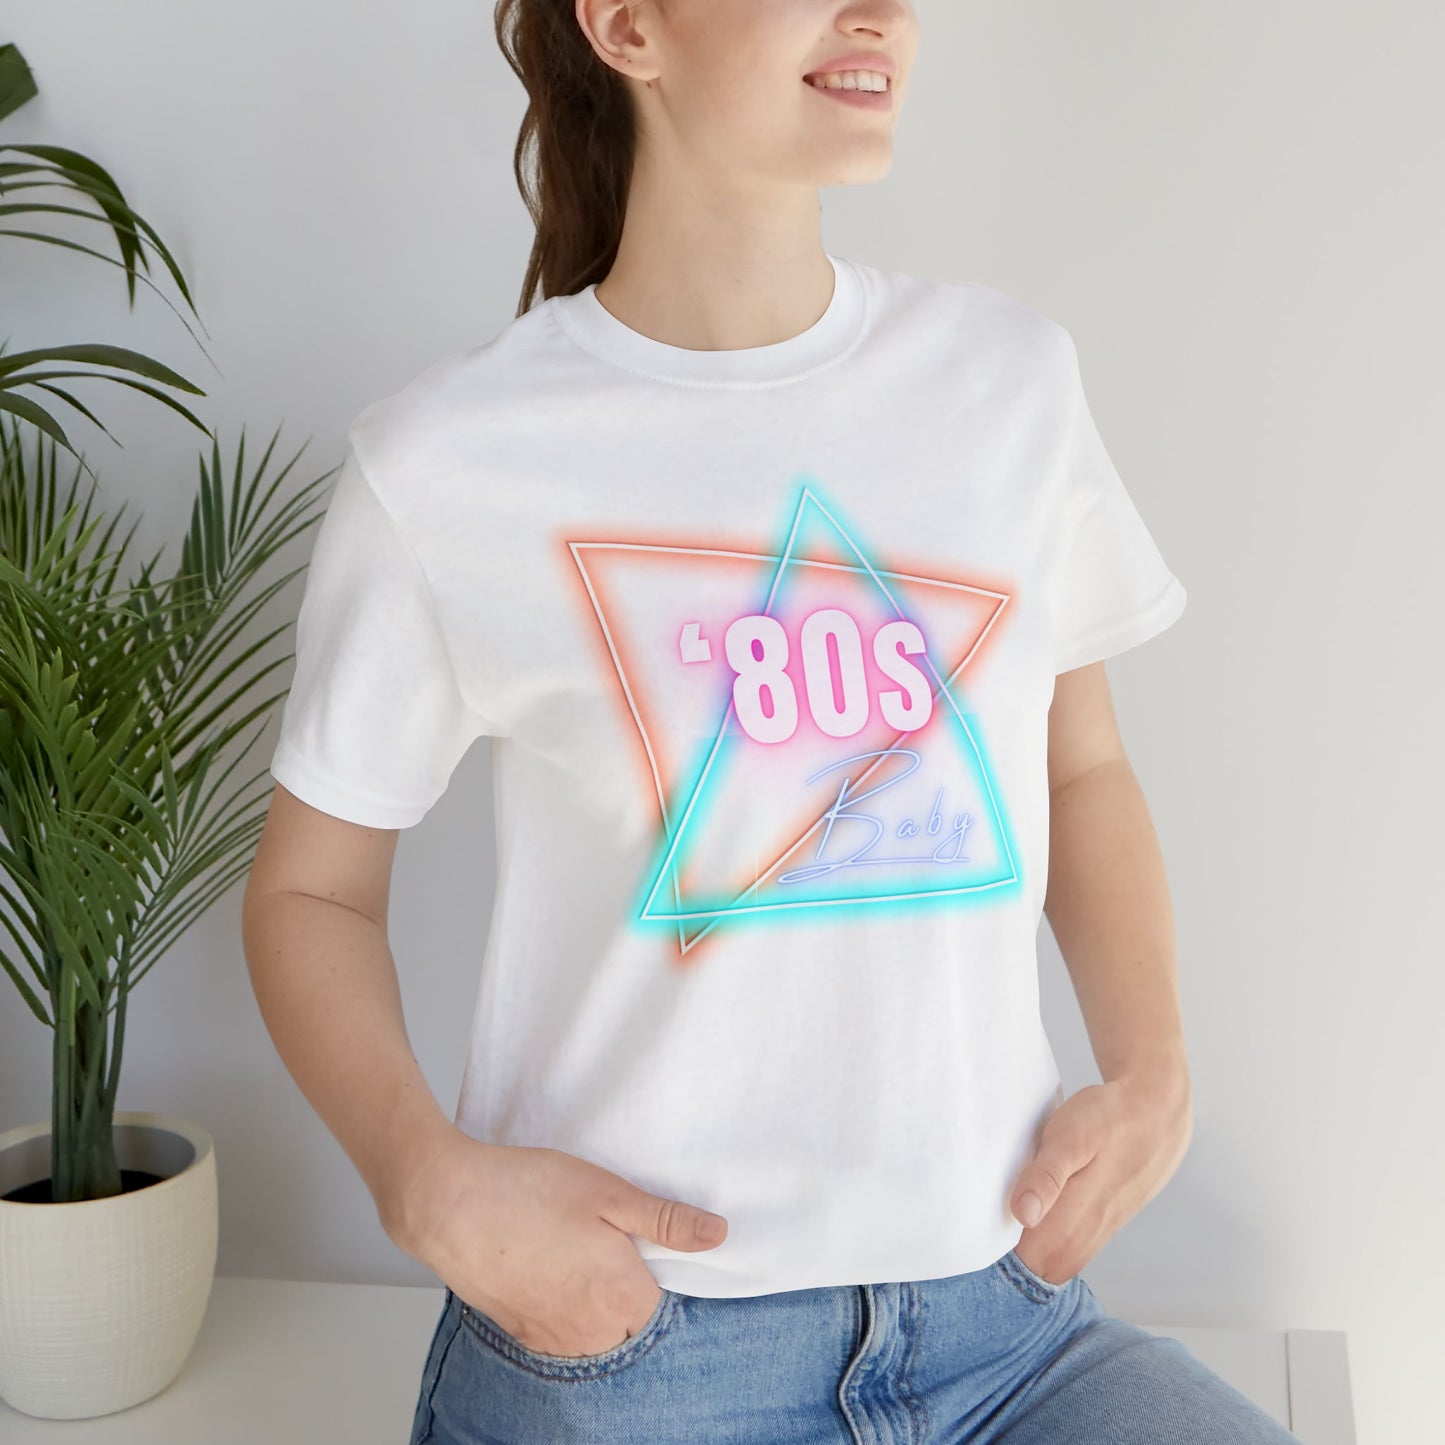 80's Baby Retro Jersey Short Sleeve Tee [Multiple Color Options]